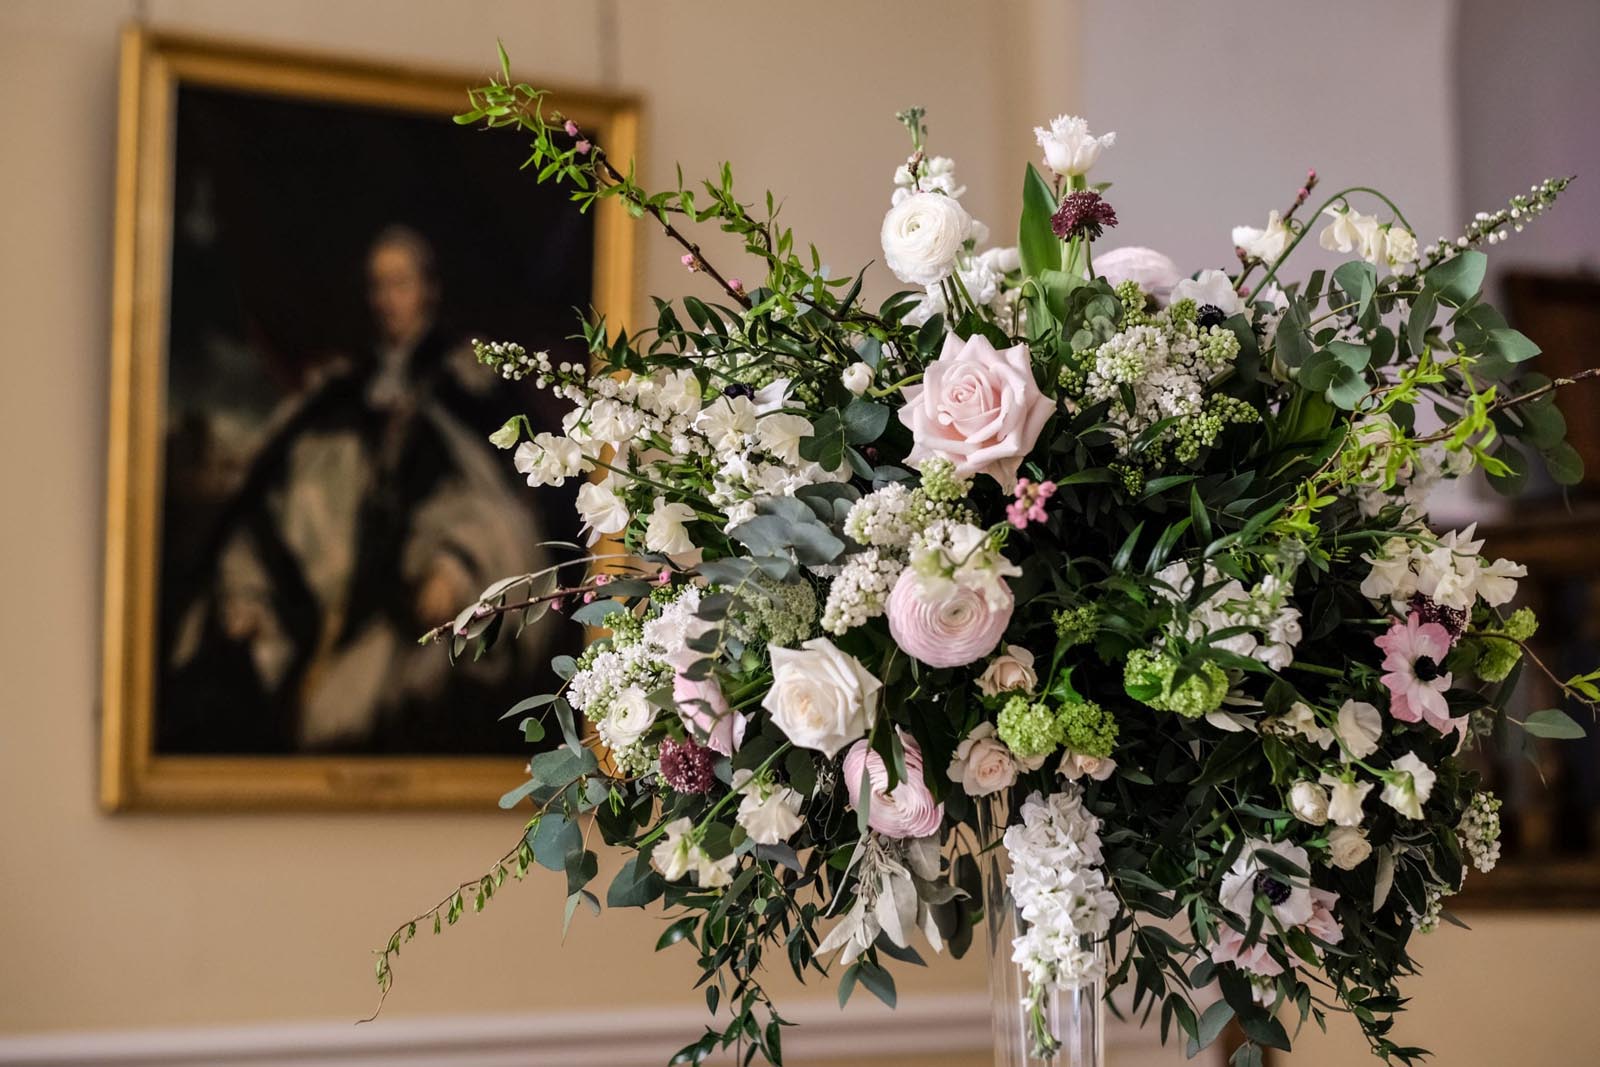 Floral display in The Great Hall at Farnham Castle